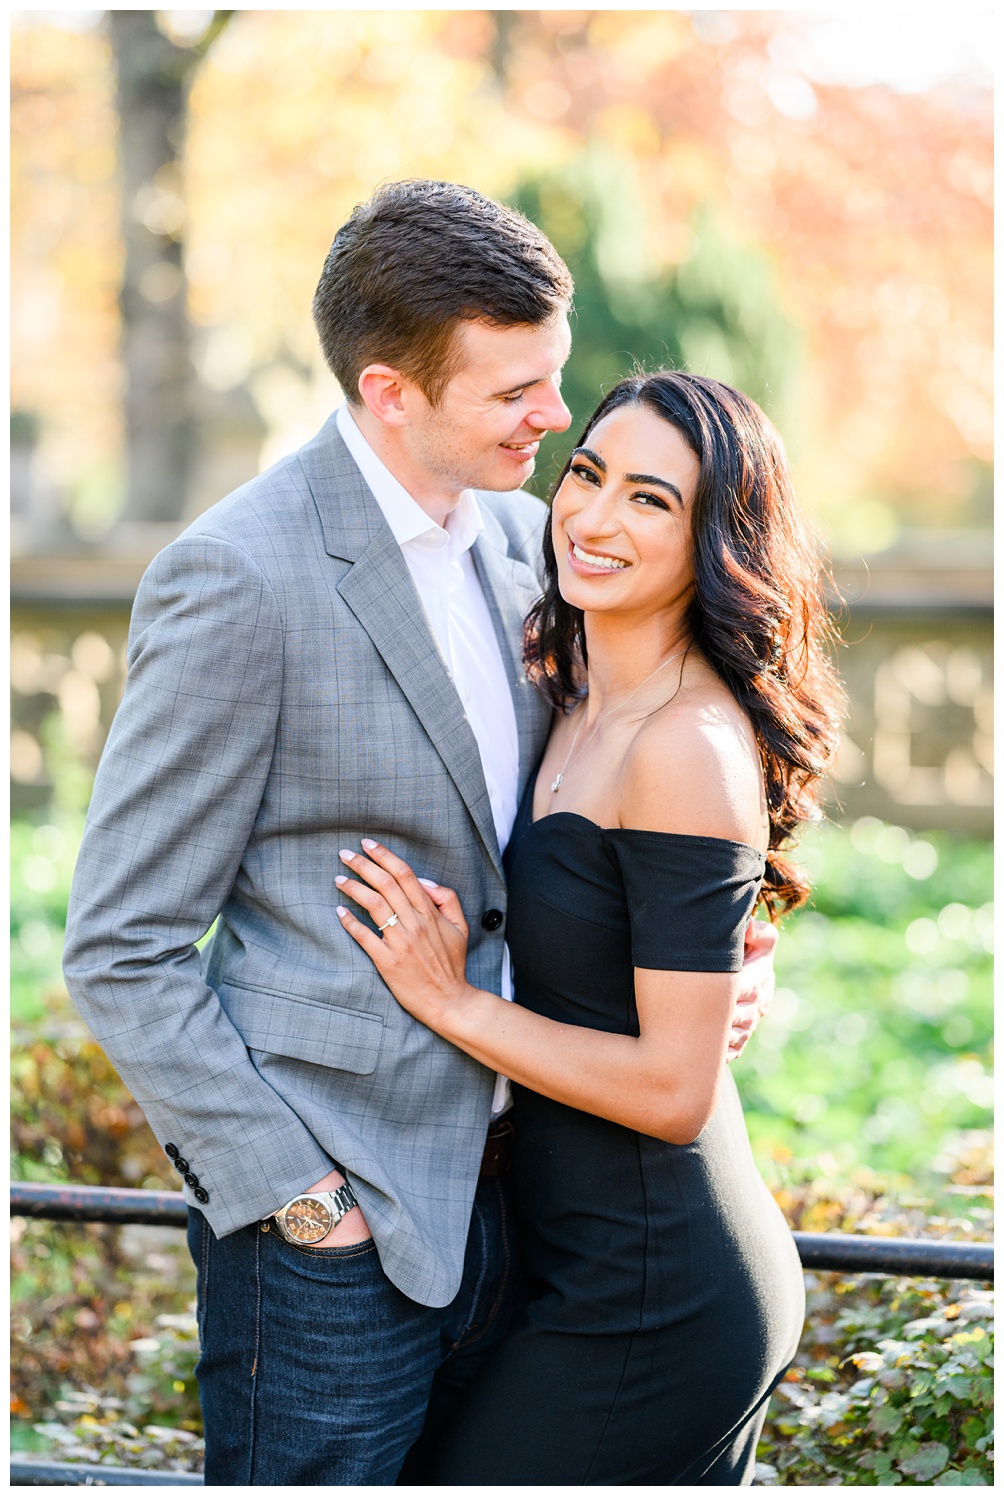 Central park engagement photos in November